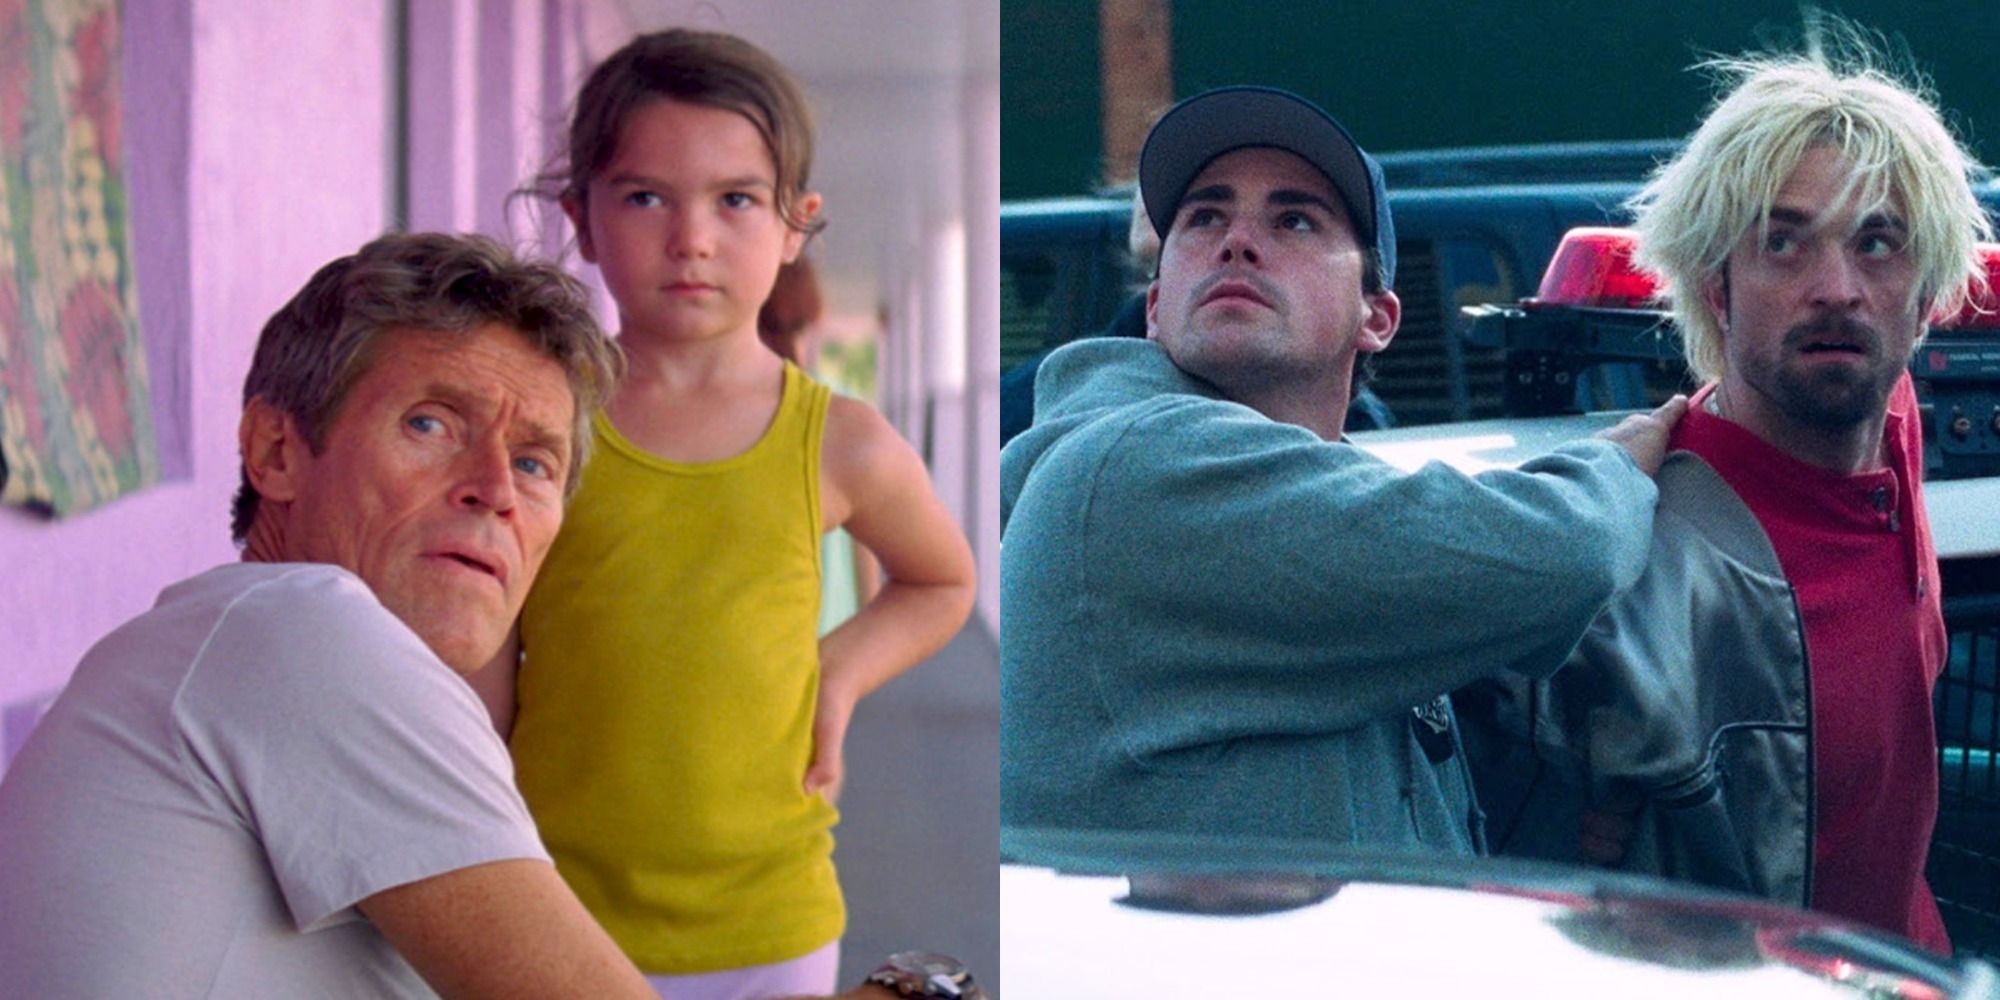 Split image showing scenes from The Florida Project and Good Time